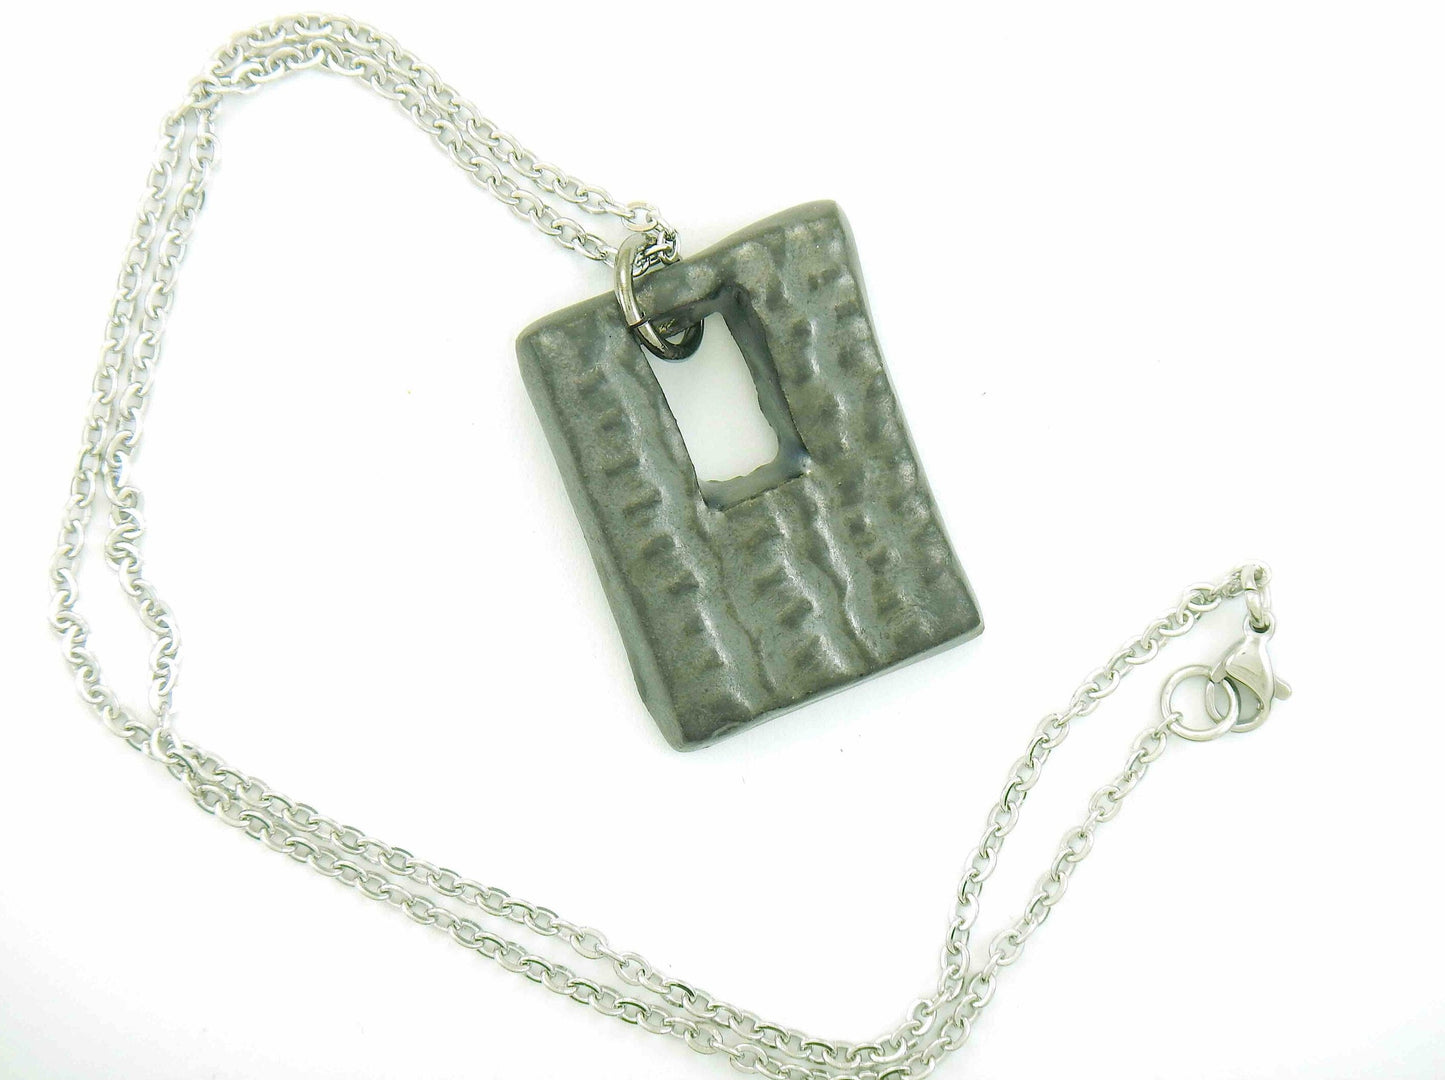 16-inch necklace with black nickel rectangular ceramics pendant handmade in Montreal, stainless steel chain